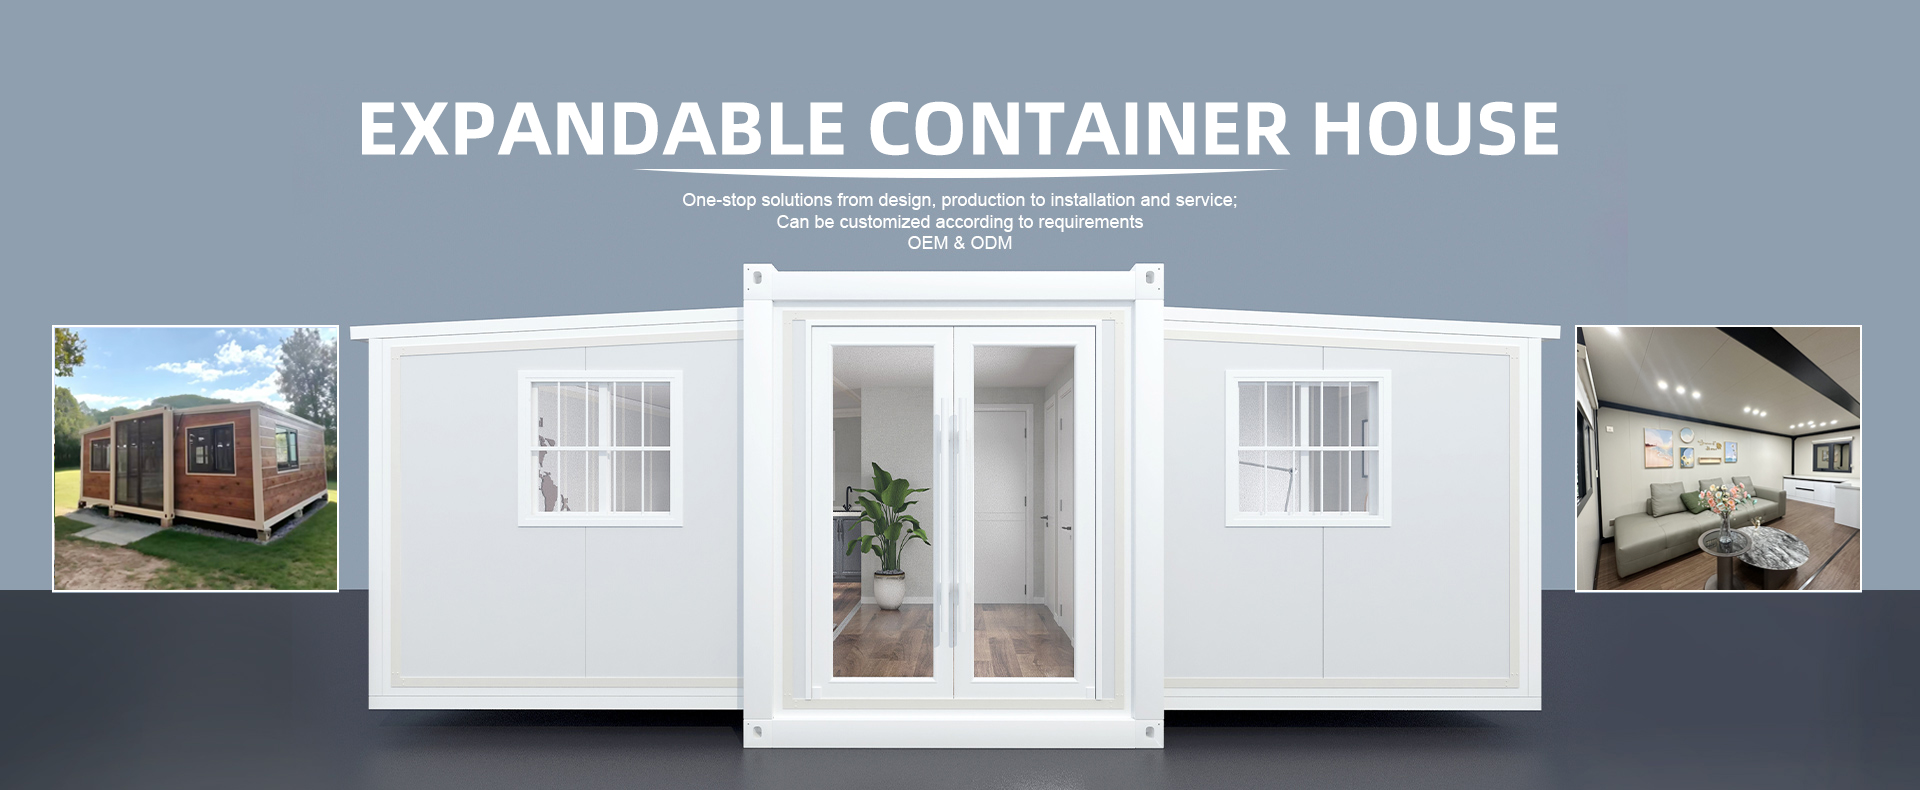 Expandable container house Banner01